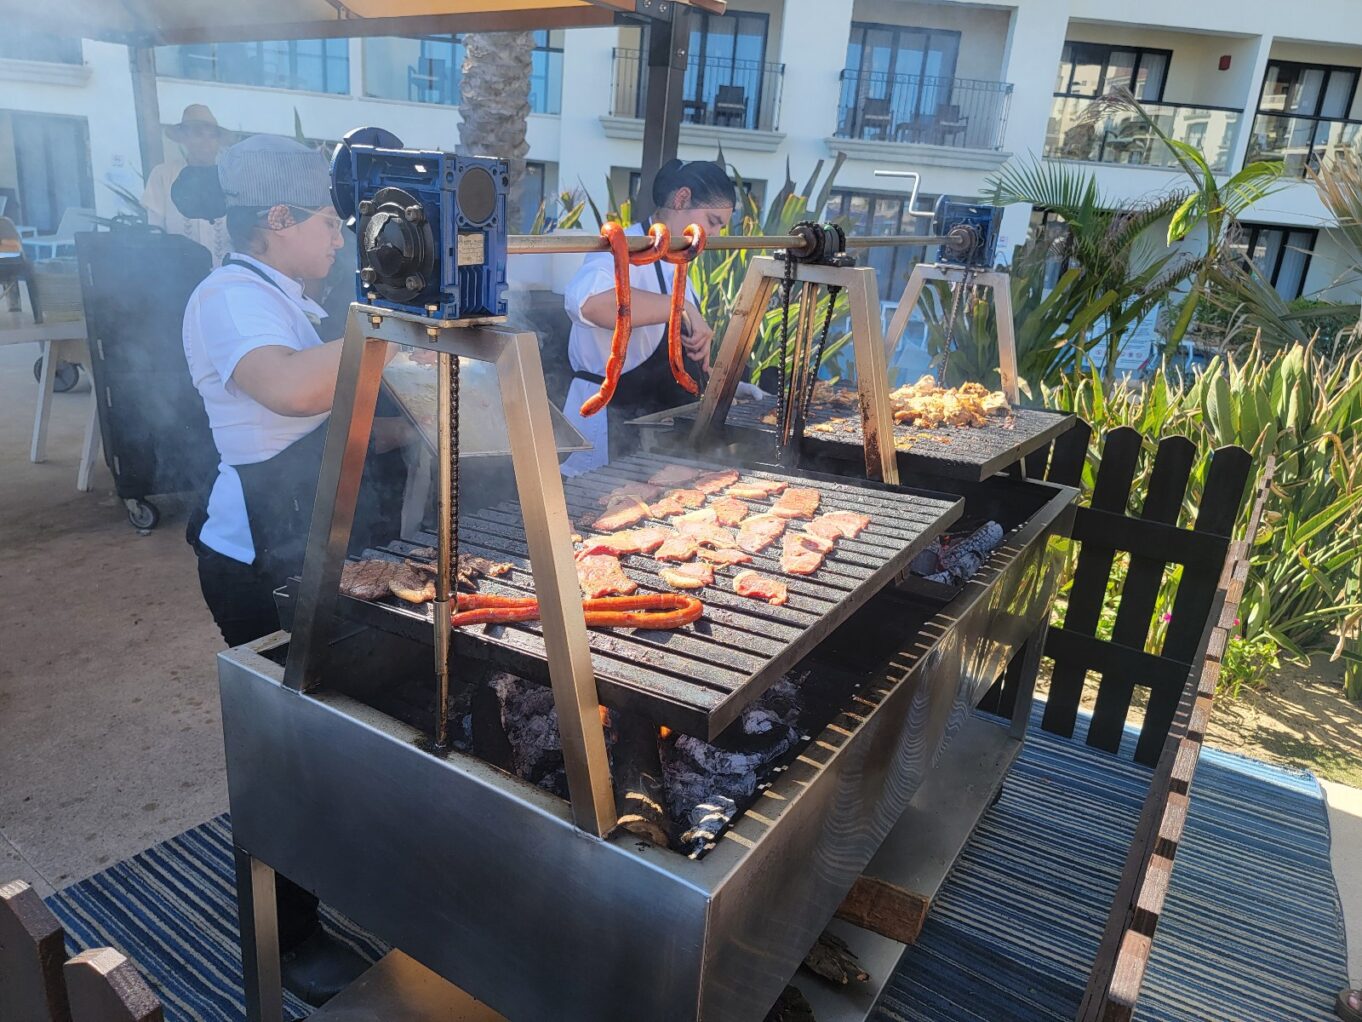 a person cooking food on a grill